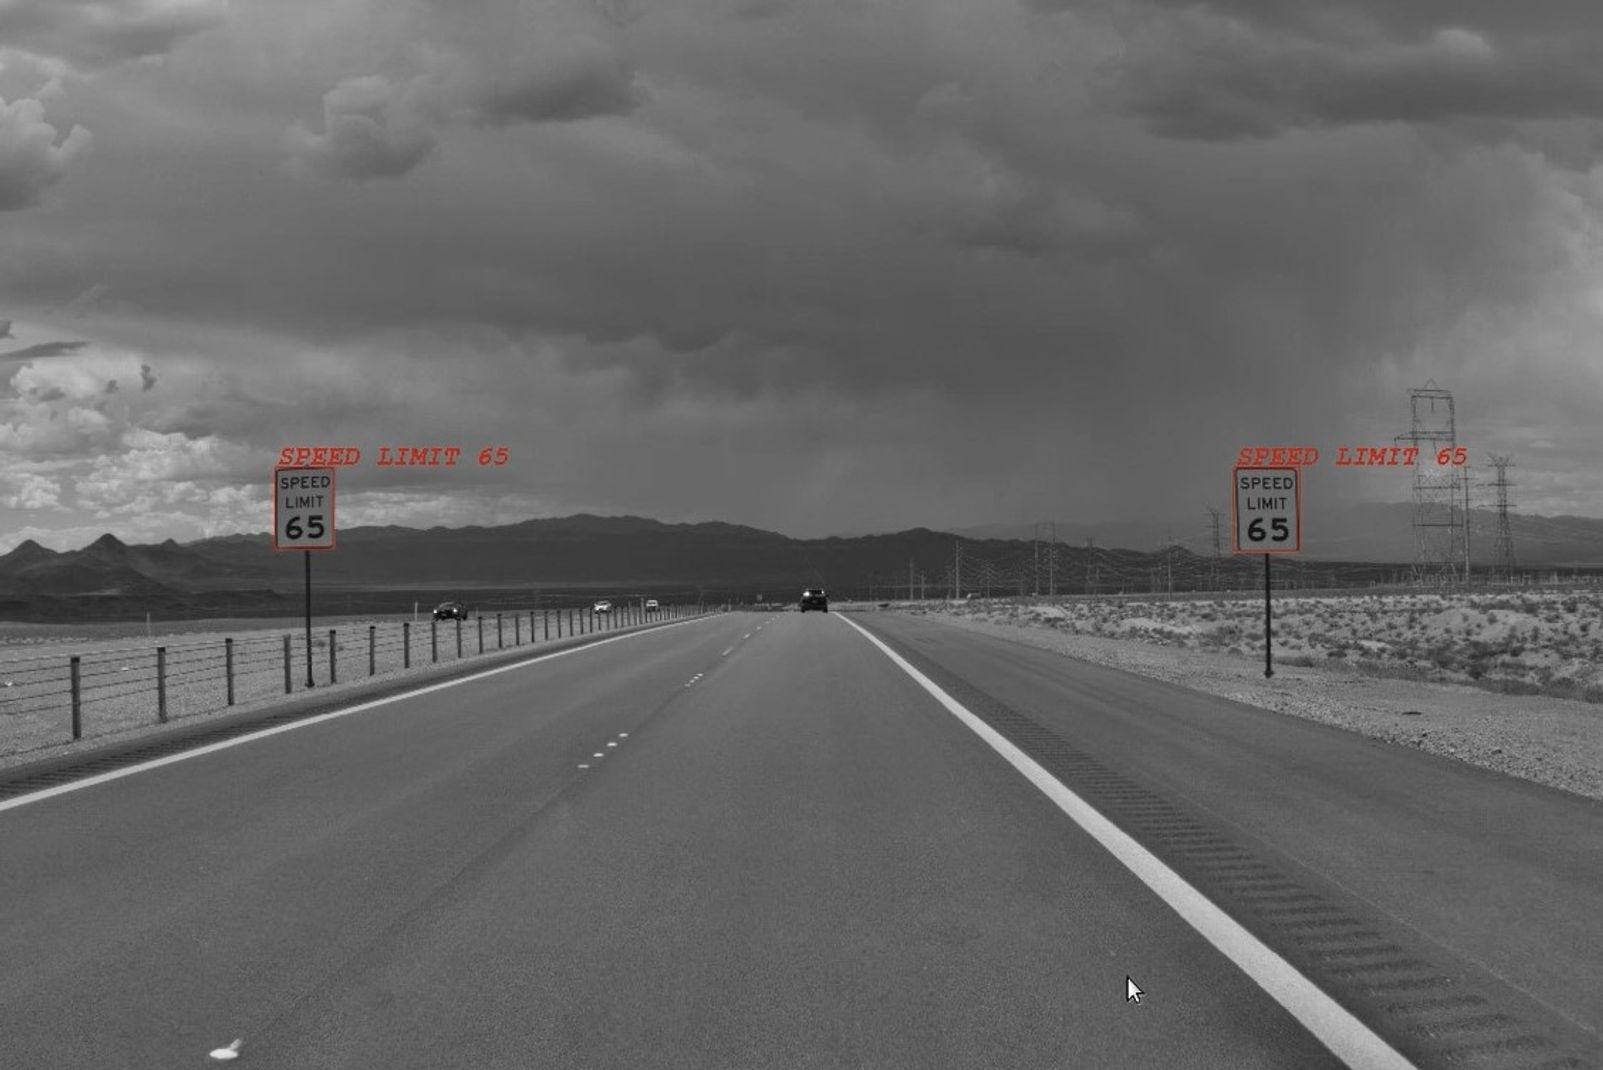 With Optical Character Recognition (OCR) capabilities, Mobileye cameras can not only identify road signs by their shape, color, and icons, but read the text as well.